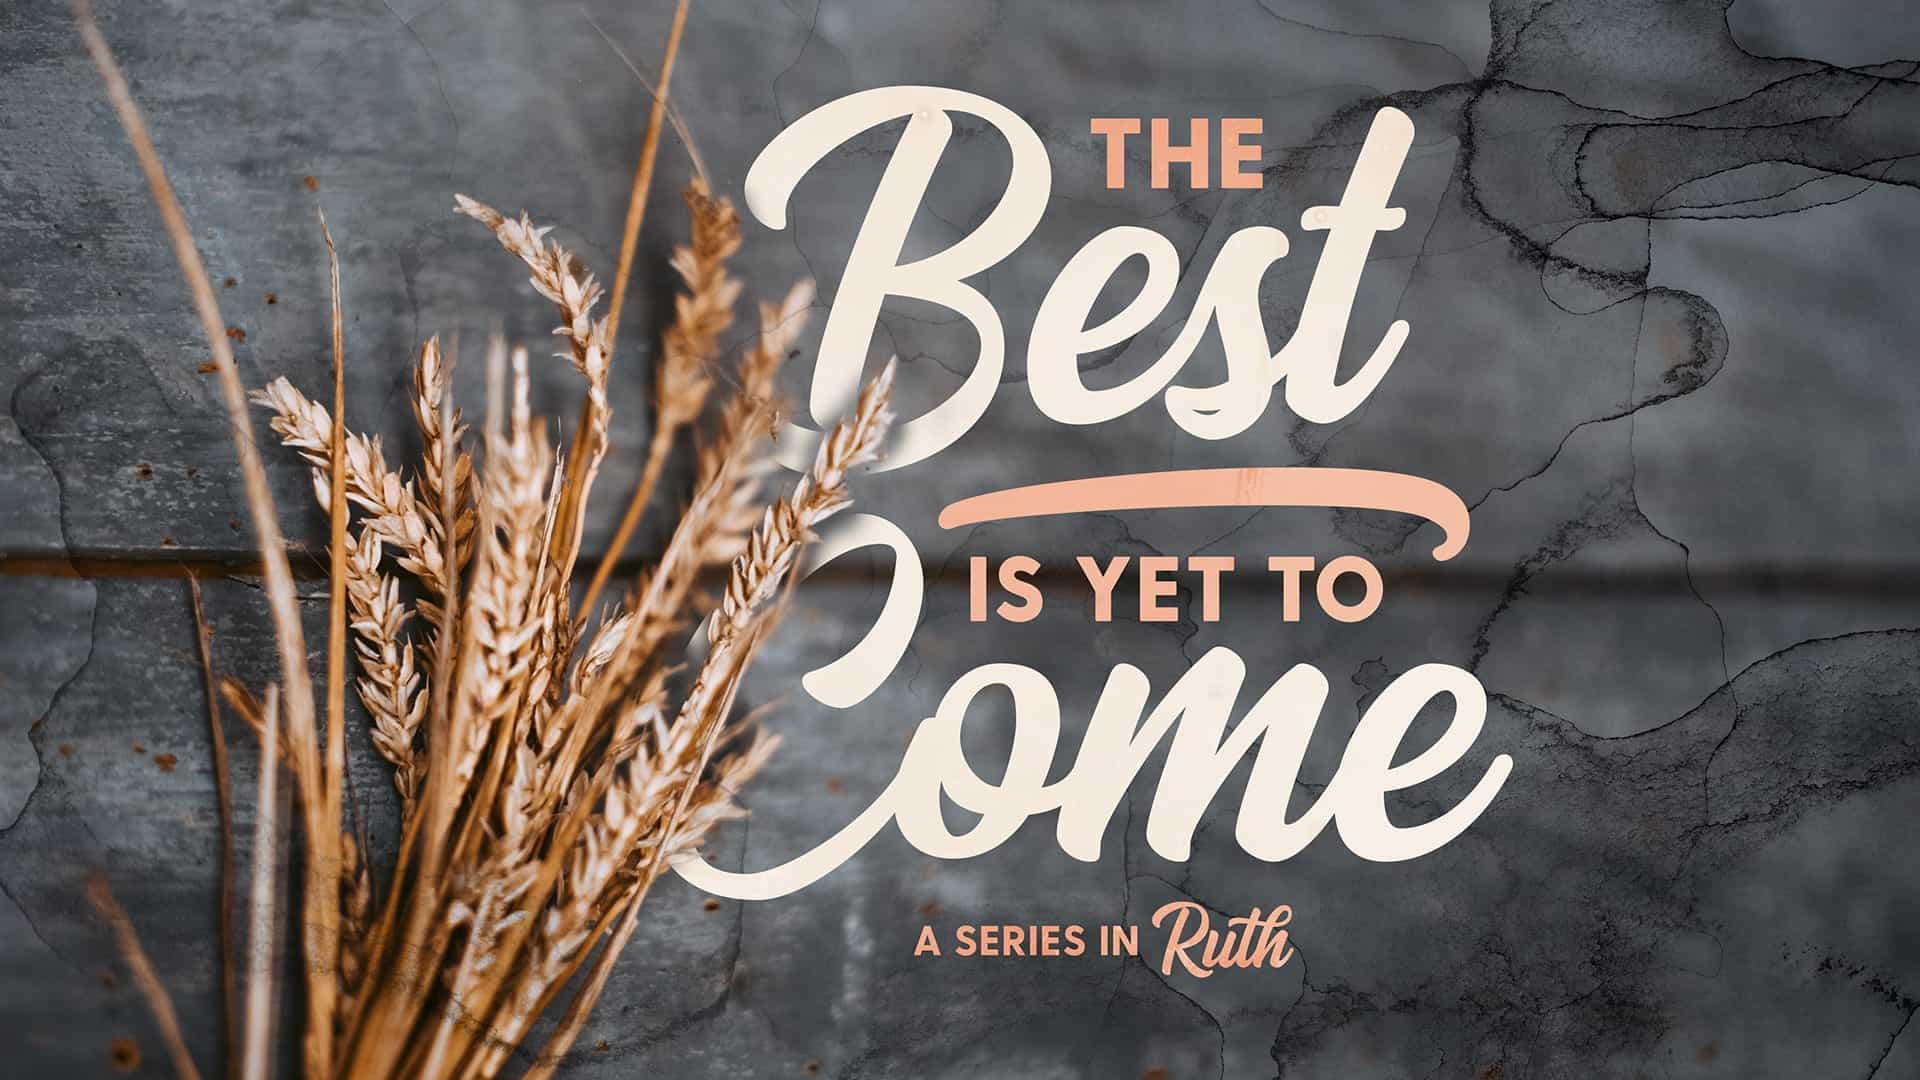 The Book of Ruth: The Best is Yet to Come - Love for the Long-Haul  2/23/2020